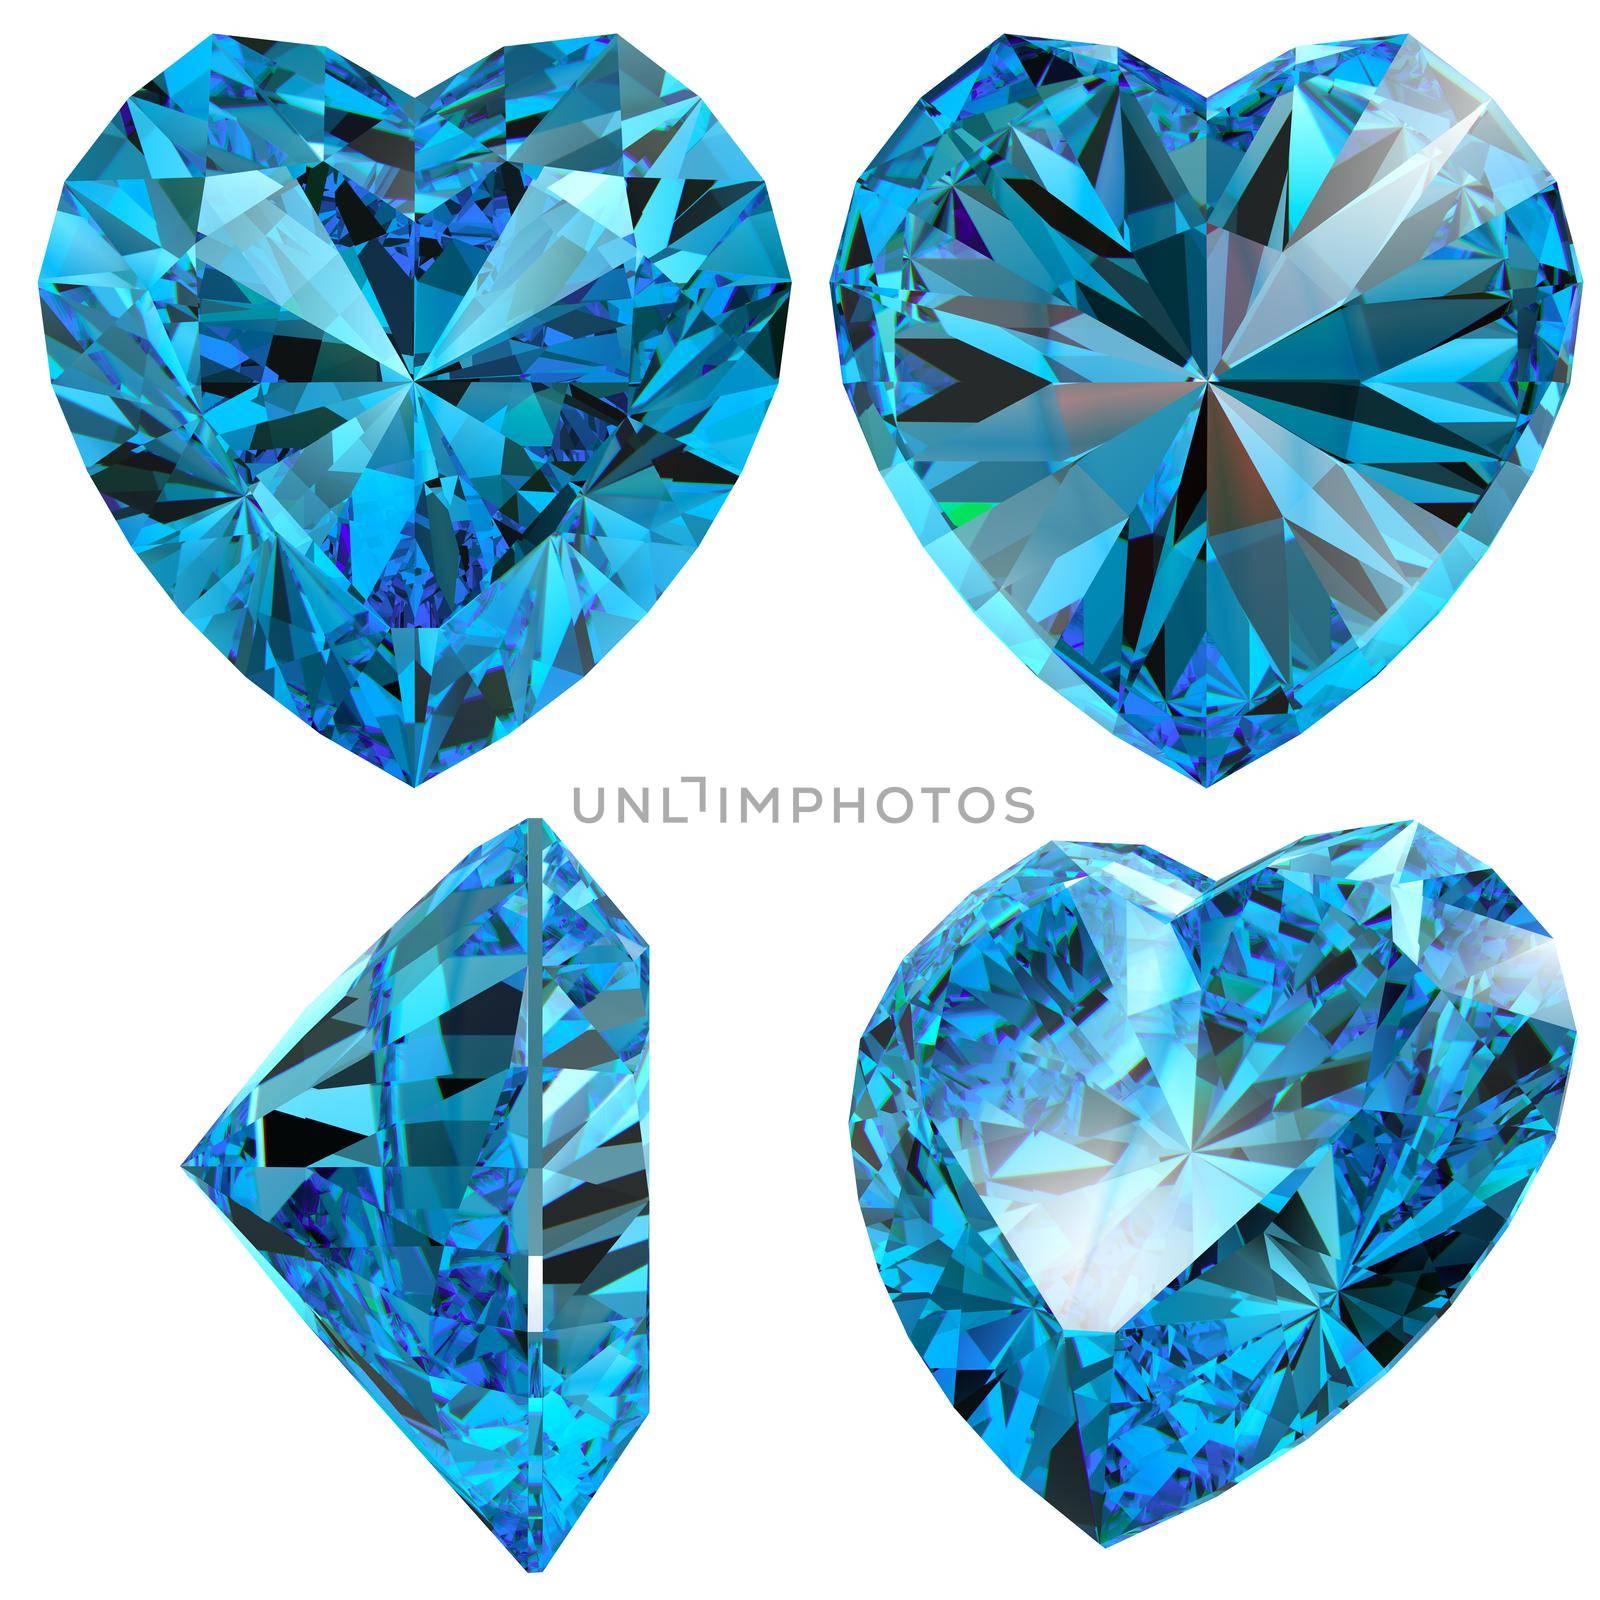 Blue heart diamond cut gem isolated different views with refraction